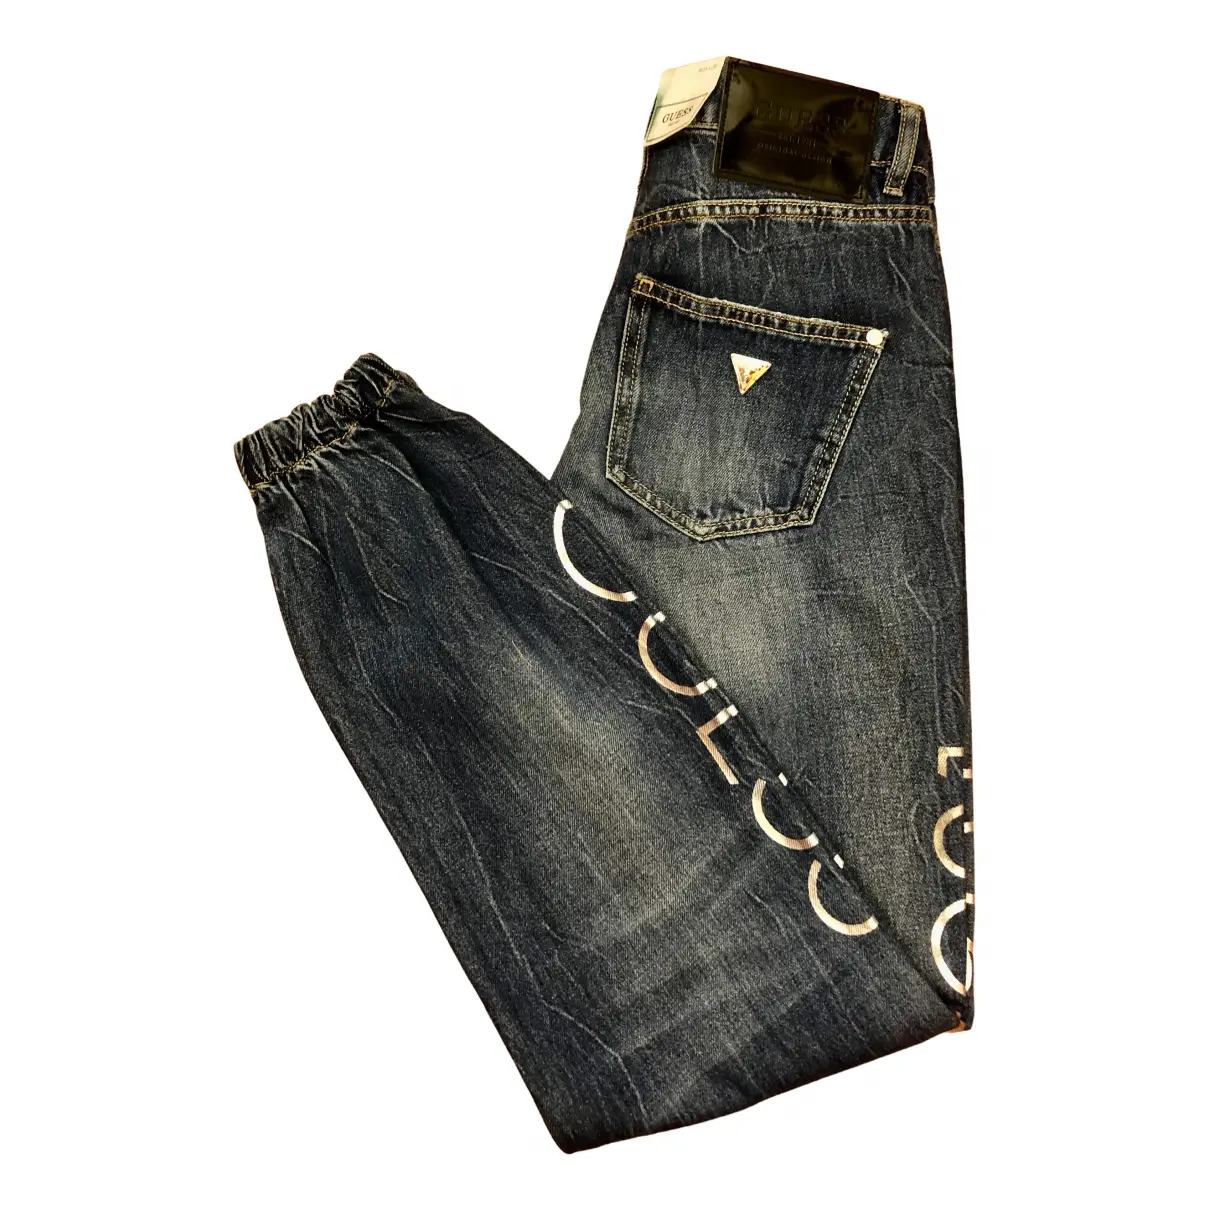 Buy GUESS Jeans online